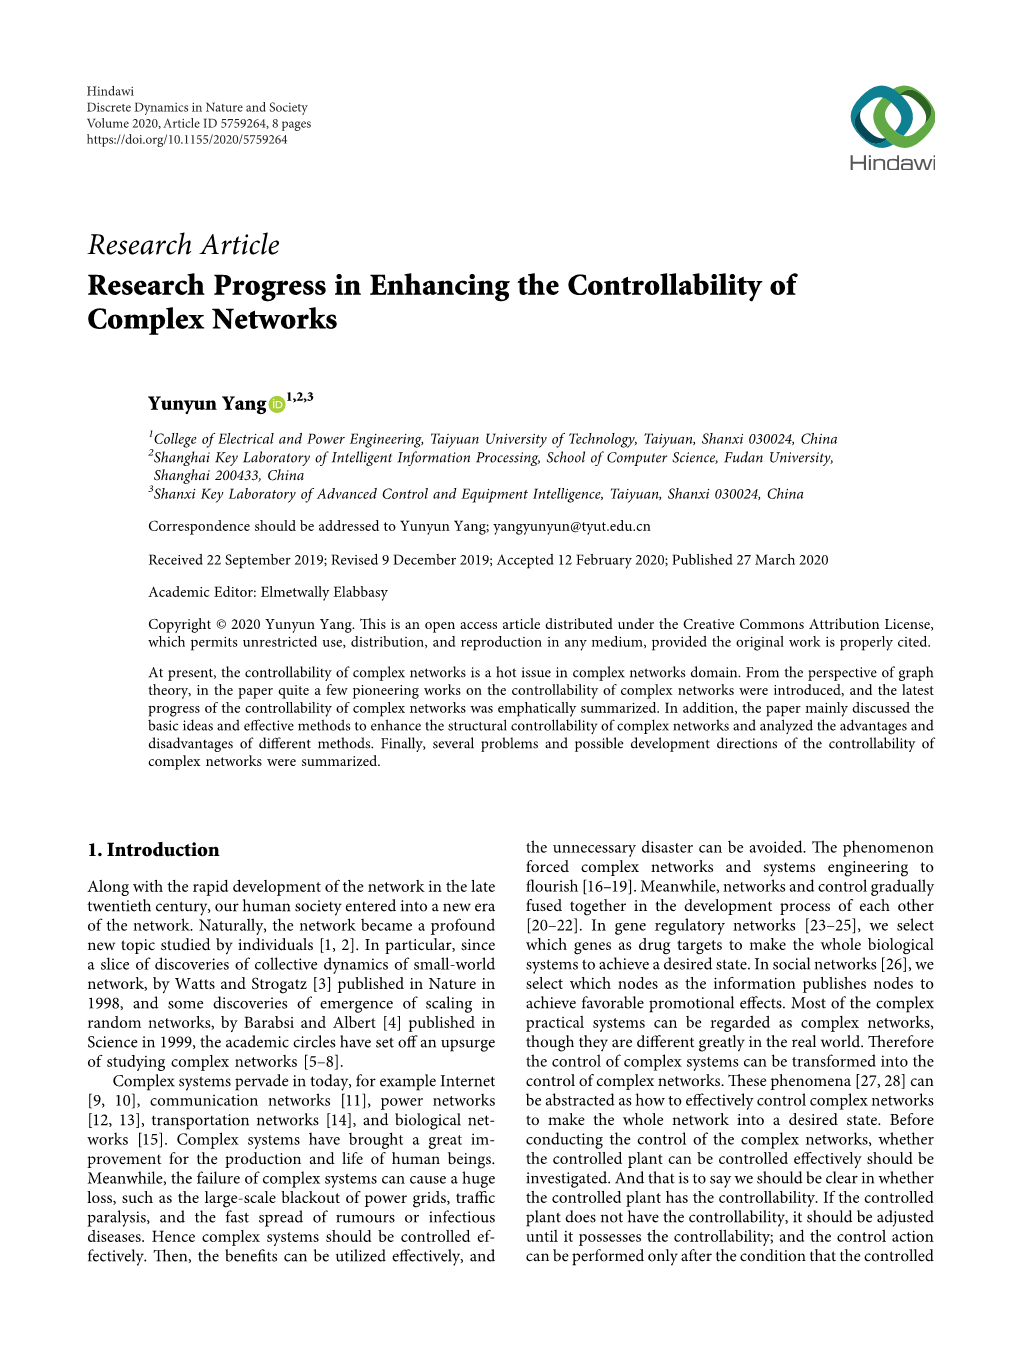 Research Progress in Enhancing the Controllability of Complex Networks